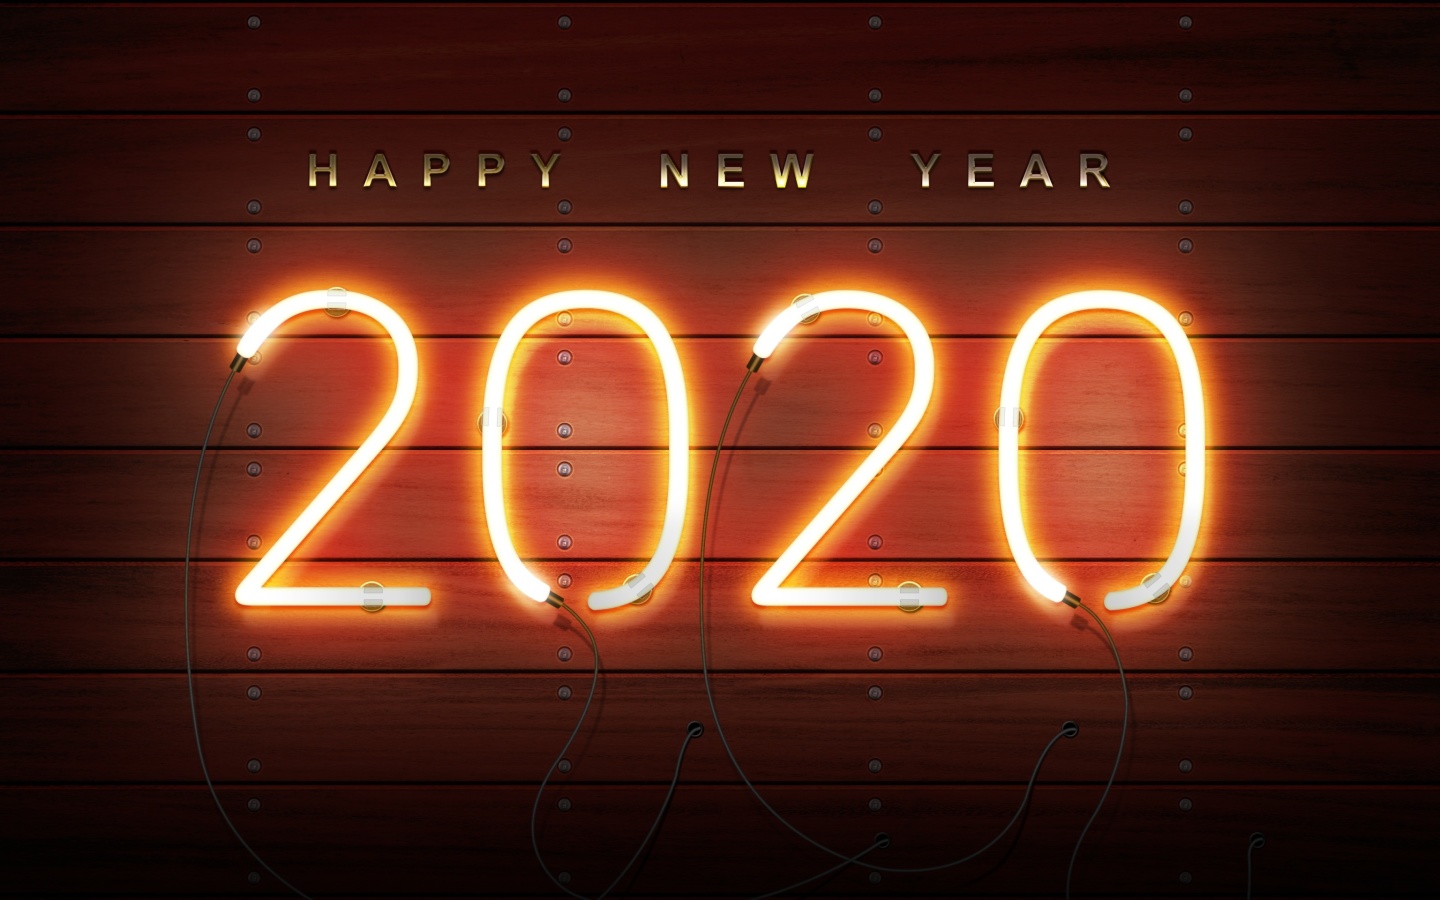 Happy New Year 2020 Wishes wallpaper 1440x900